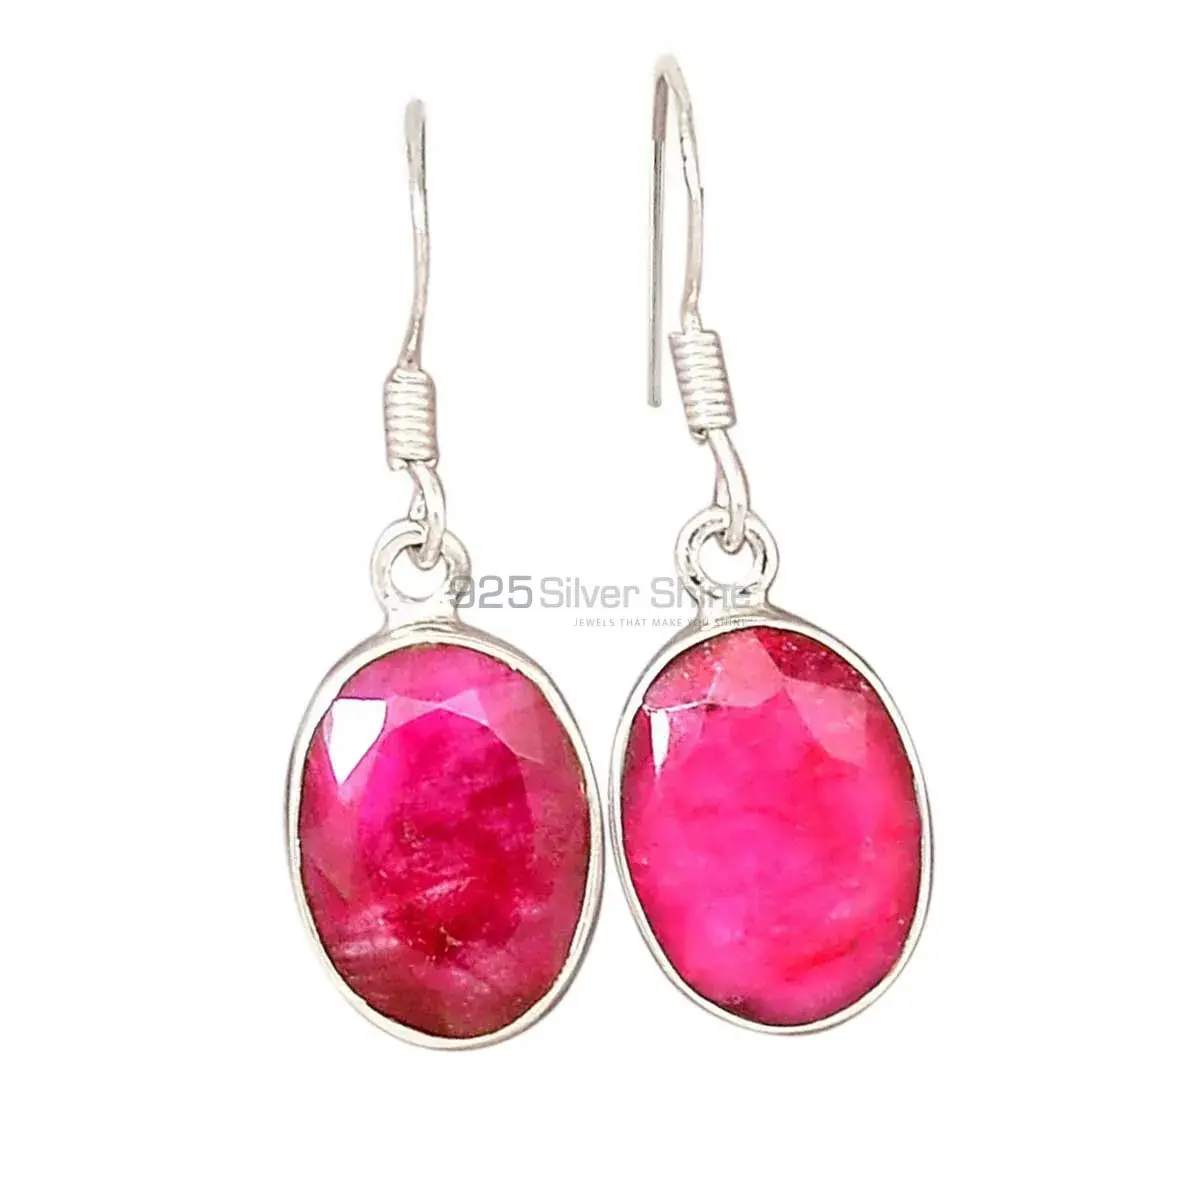 Affordable 925 Sterling Silver Handmade Earrings Manufacturer In Dyed Ruby Gemstone Jewelry 925SE2392